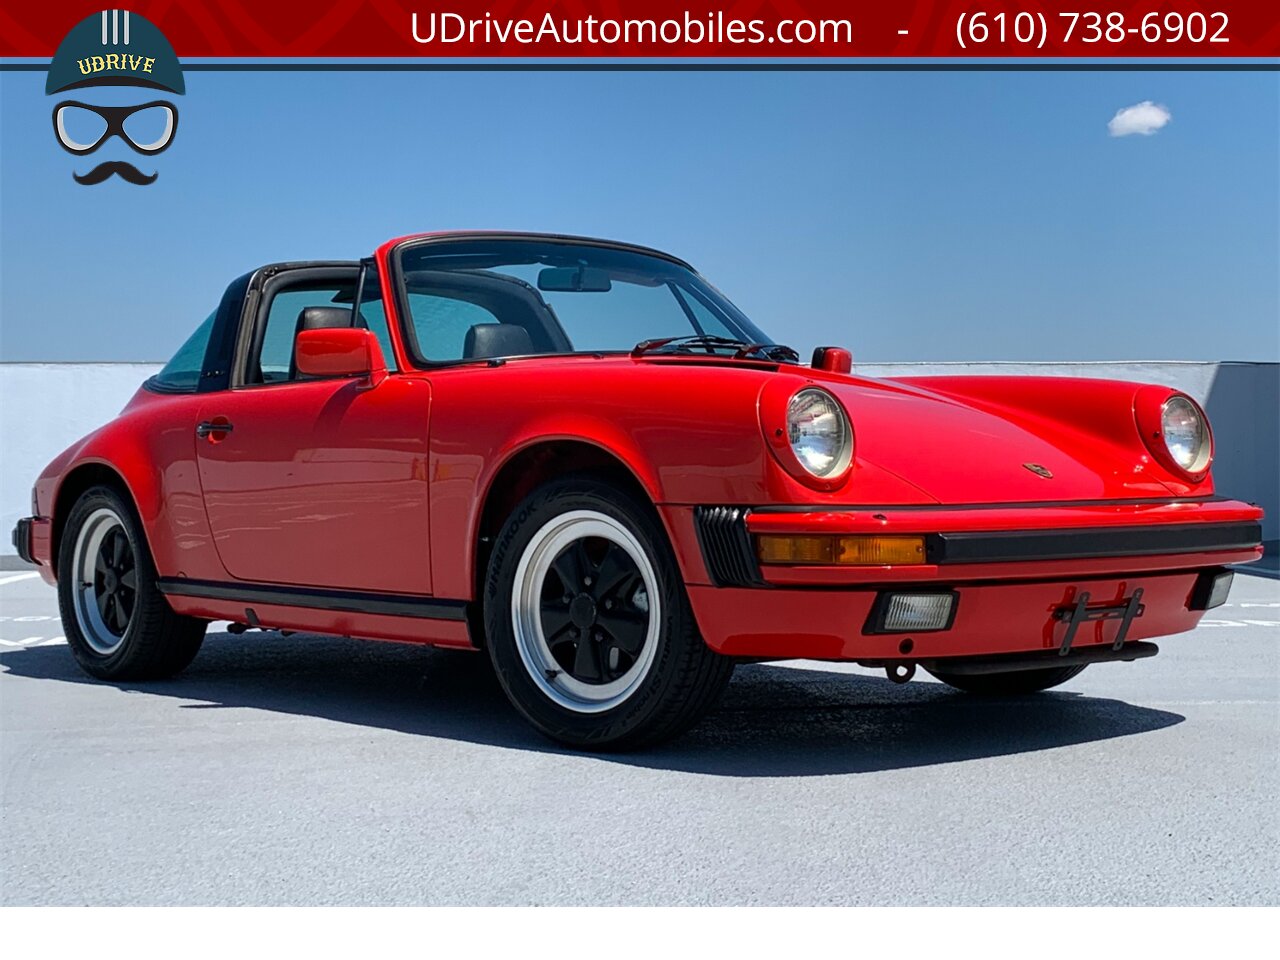 1986 Porsche 911 Carrera Targa 39k Miles Same Owner Since 1988  $23k in Service History Since 2011 - Photo 5 - West Chester, PA 19382